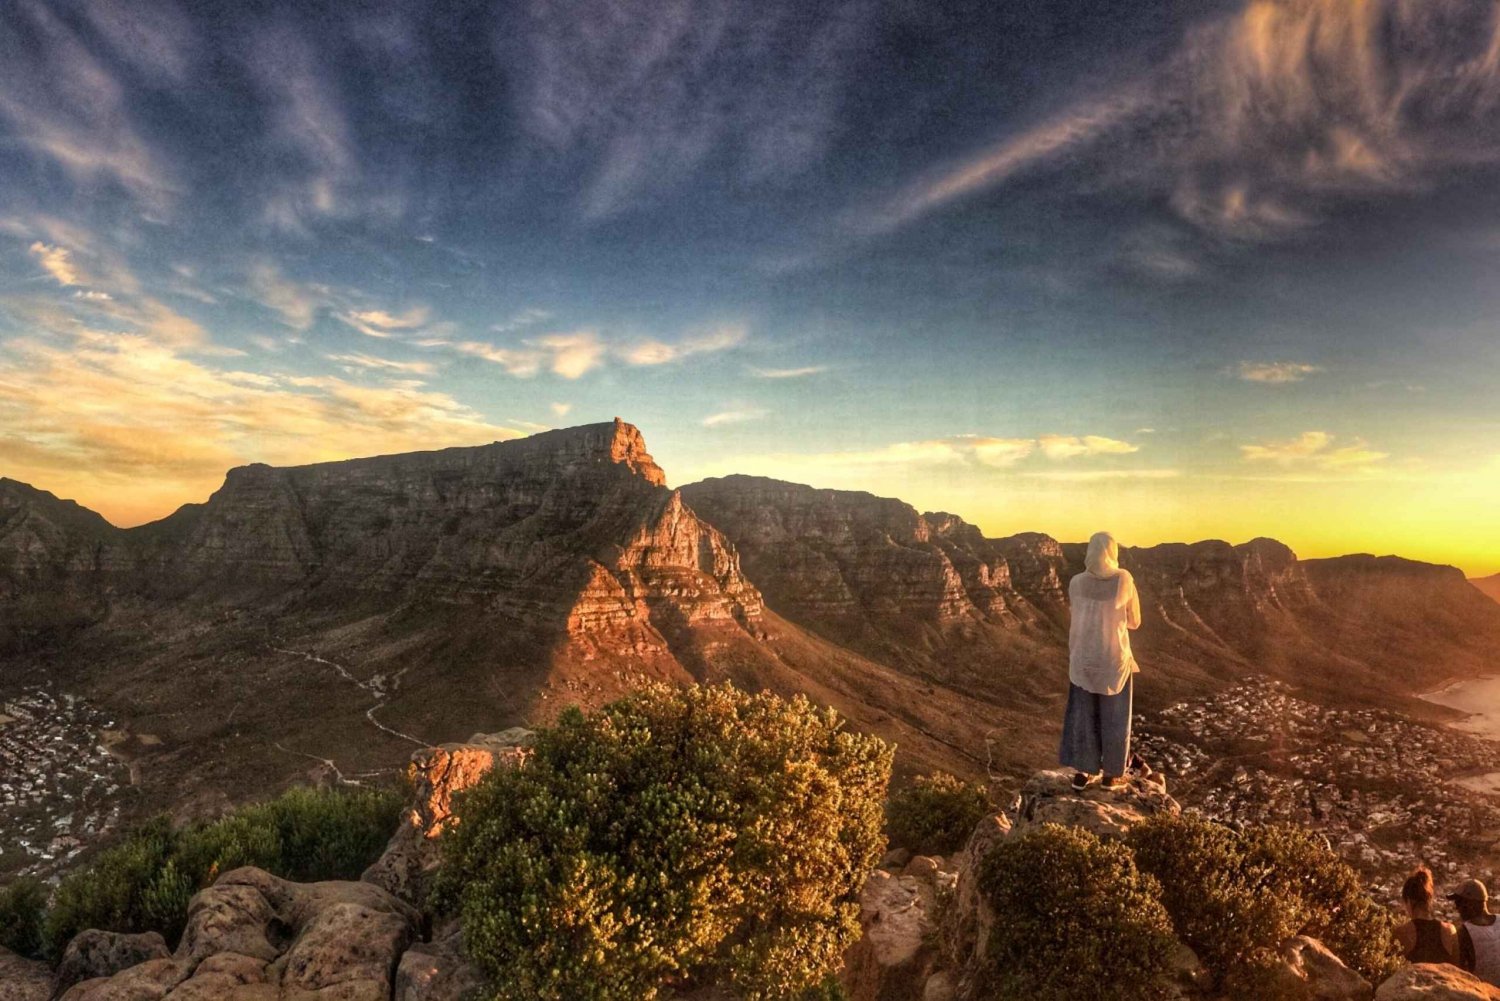 Cape Town: Enjoy the Sunset at Lion's Head on a Guided Hike